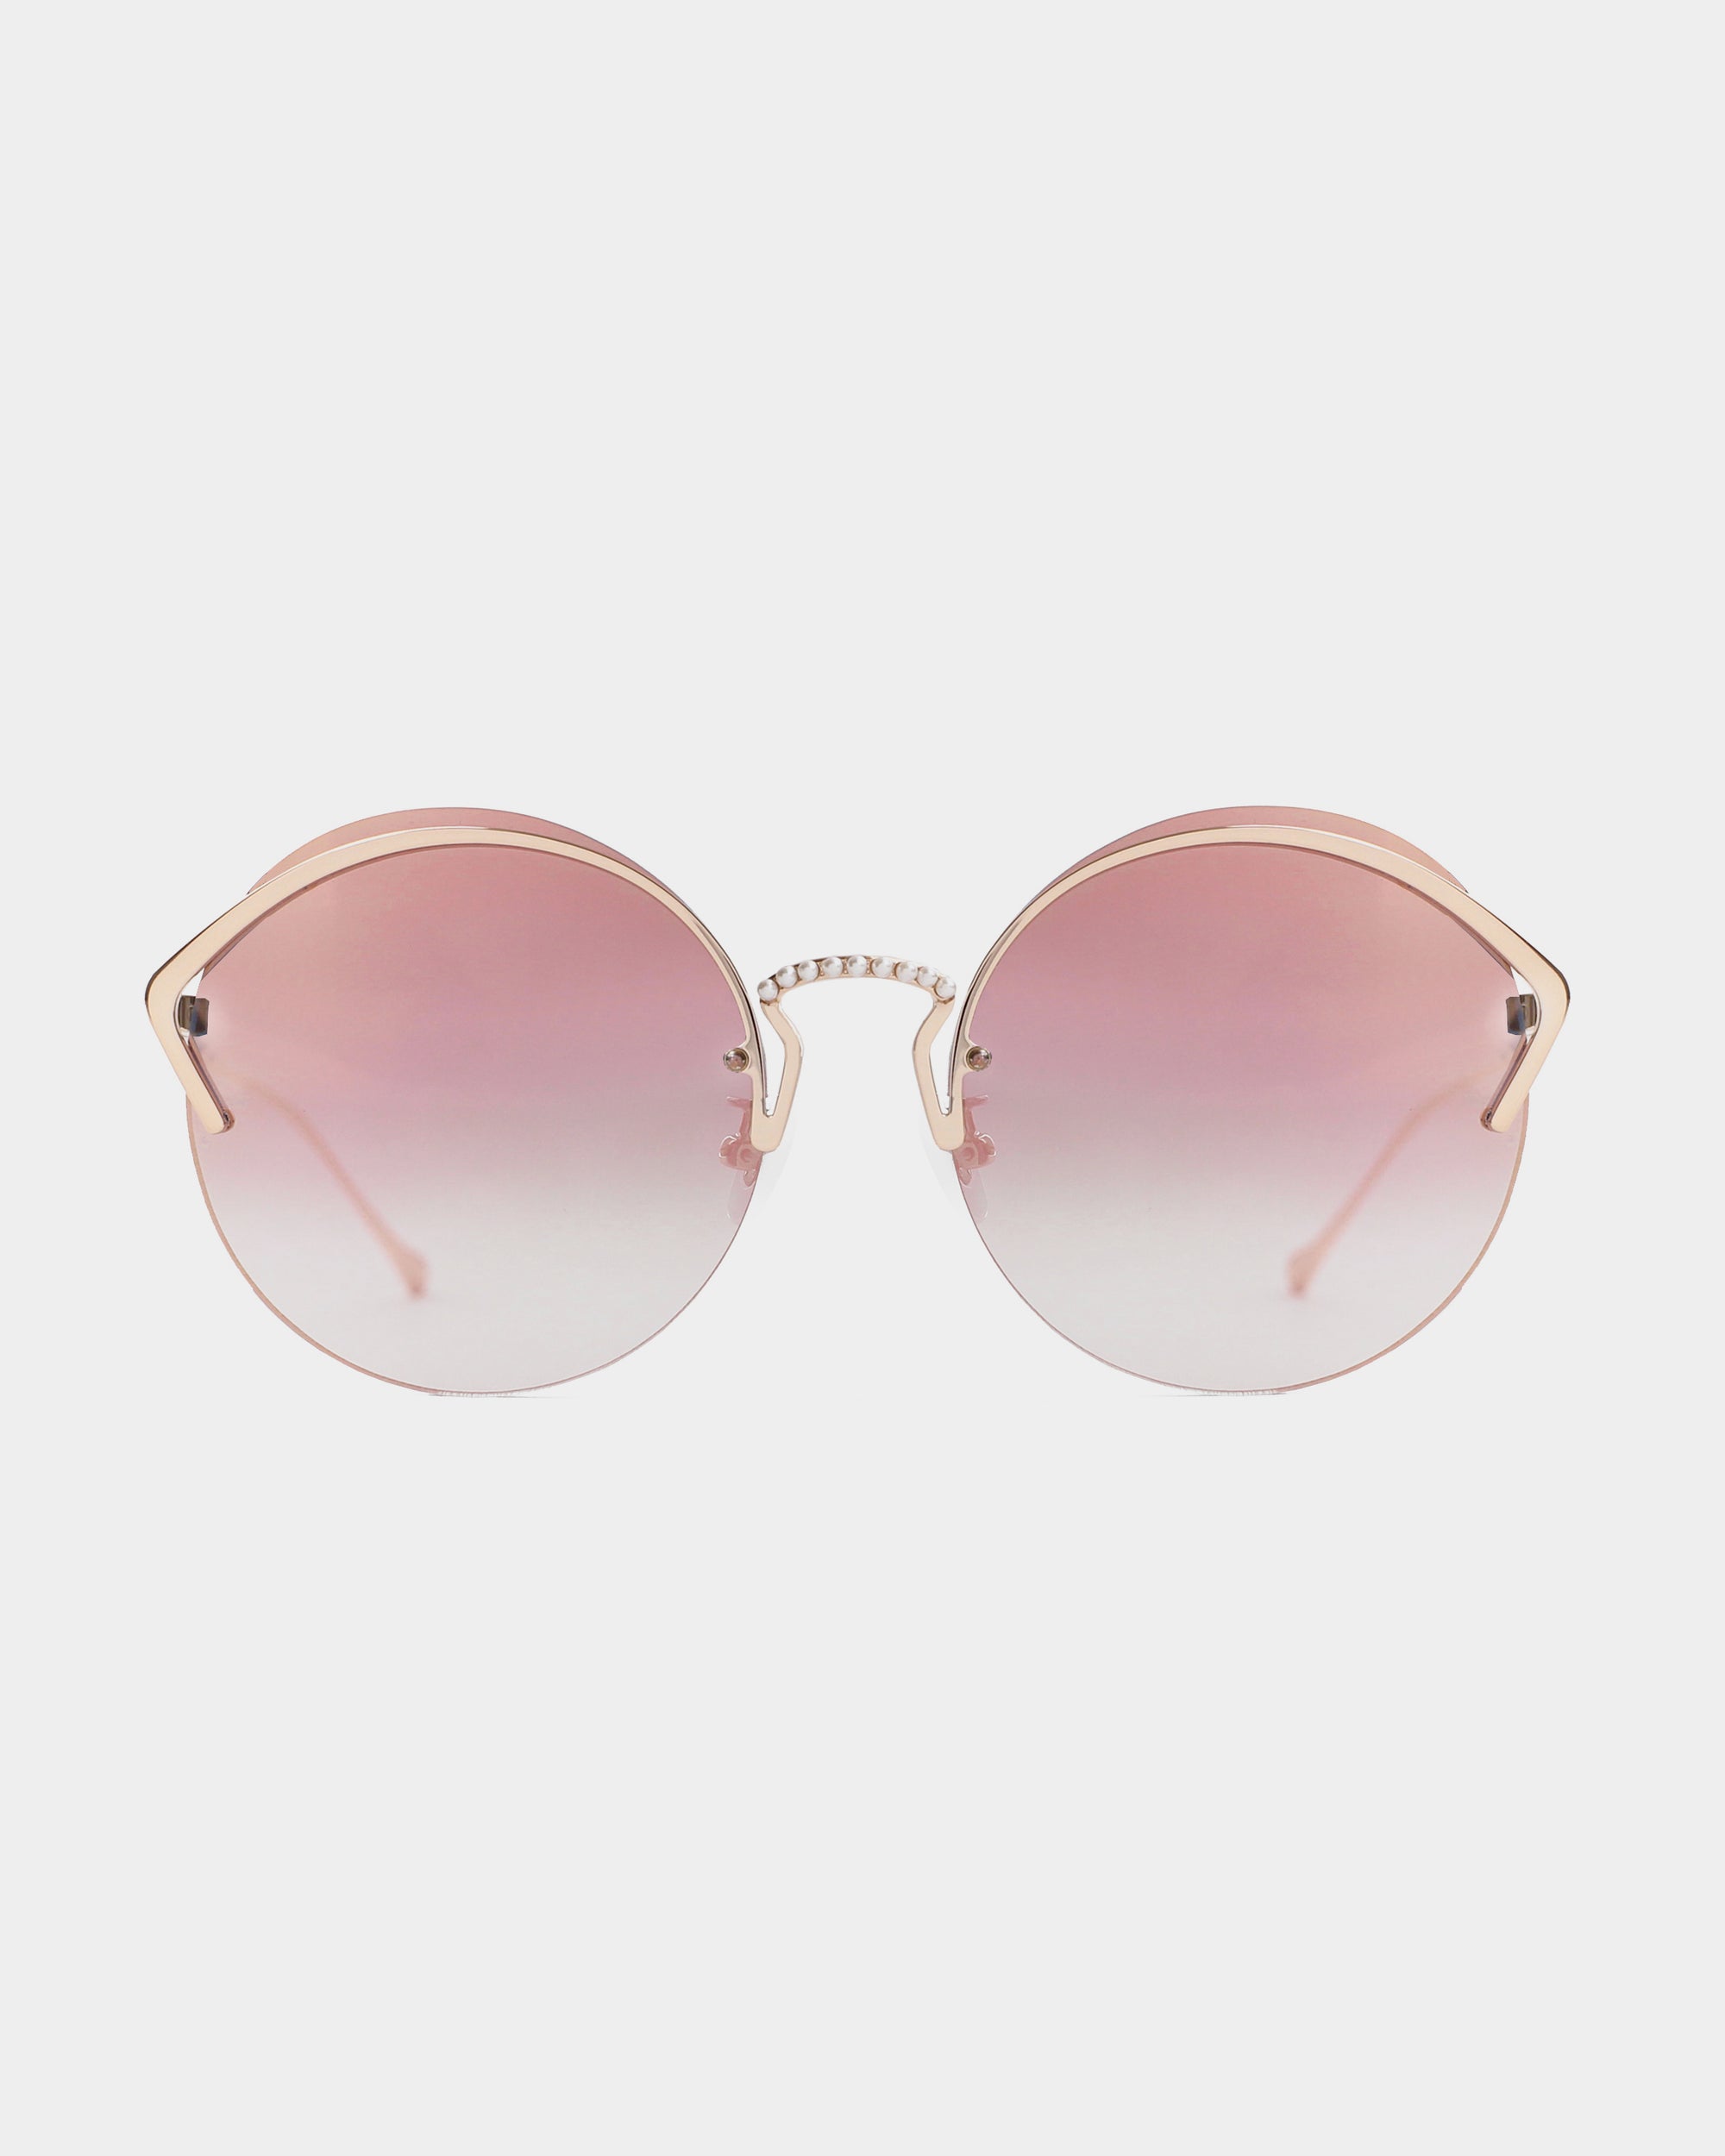 A pair of stylish, round, pink-tinted sunglasses with a gold frame is centered against a plain white background. The lenses have a gradient effect, fading from dark pink at the top to lighter pink at the bottom. These chic For Art's Sake® Margarita shades offer UV protection for your eyes all day long.